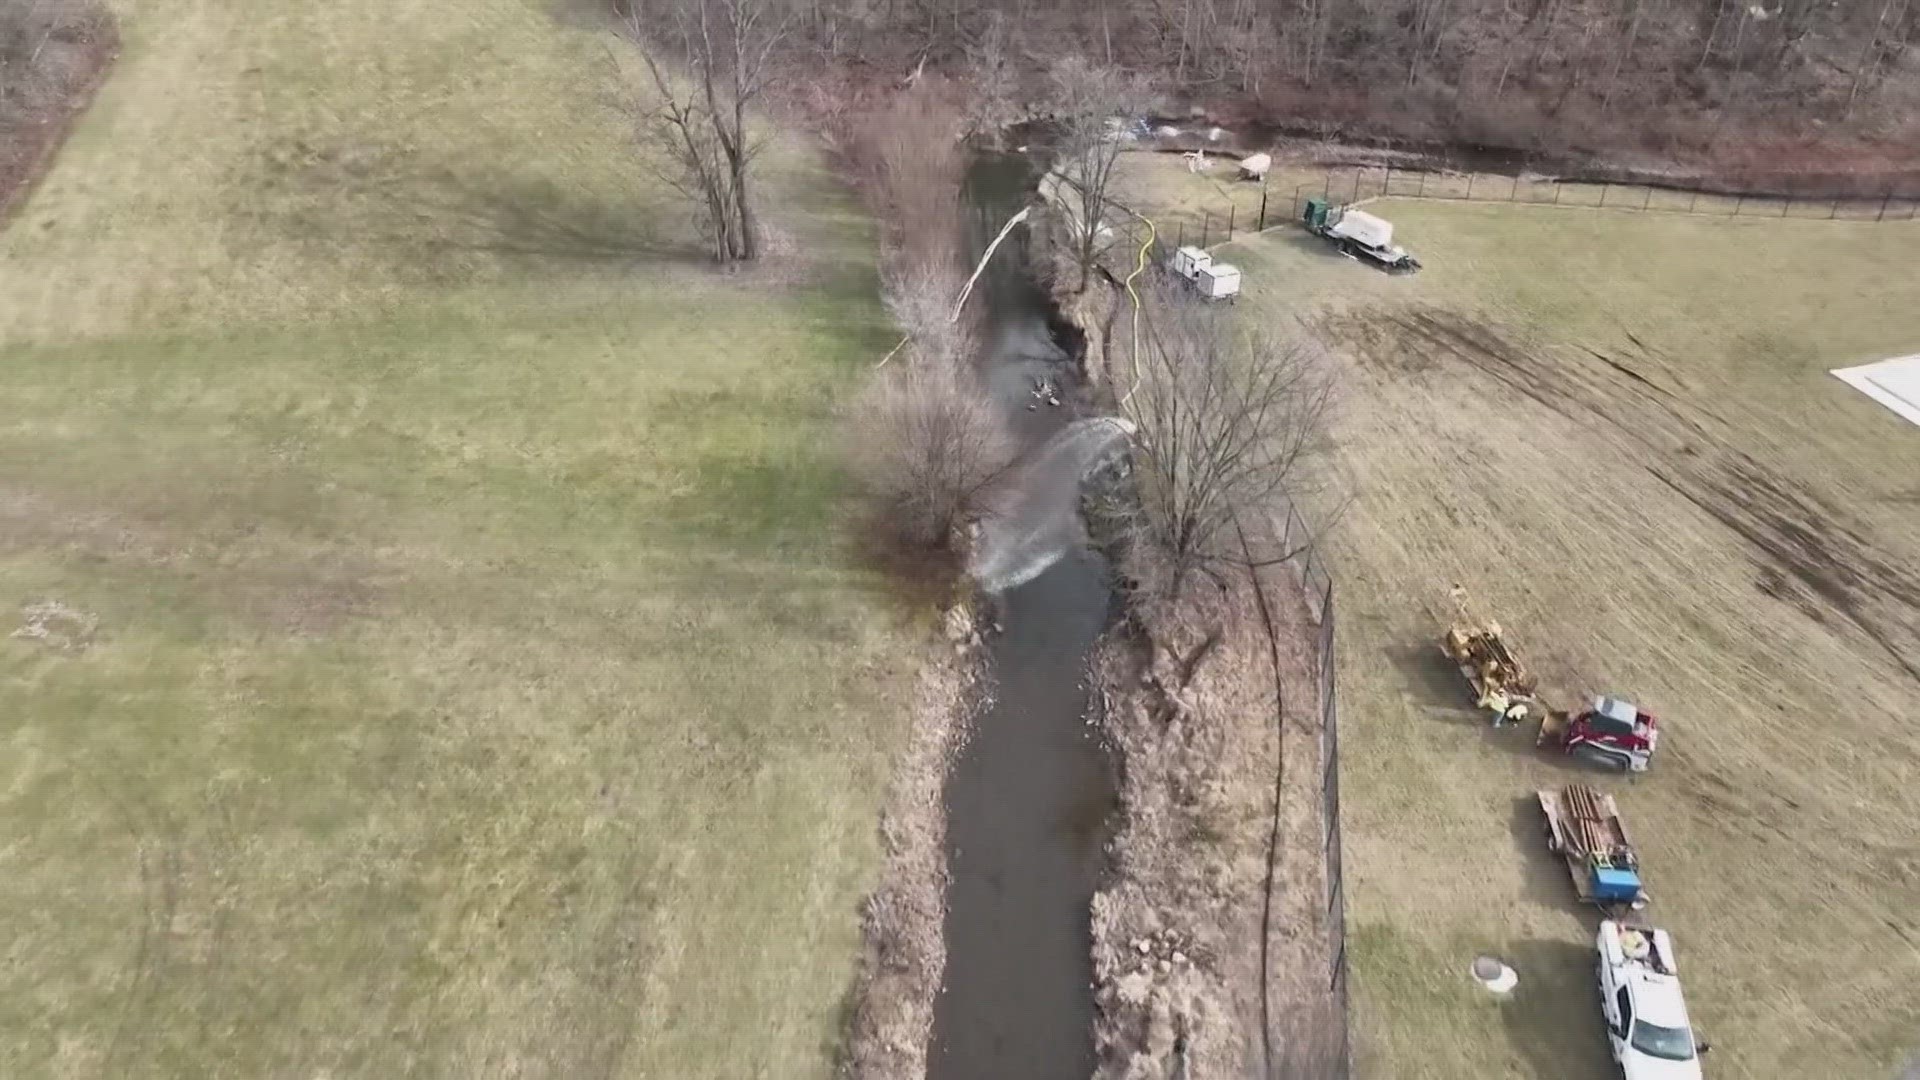 The railroad filed a complaint Friday against all the car owners and shippers connected to the hazardous chemicals that spilled in the Feb. 3 derailment.